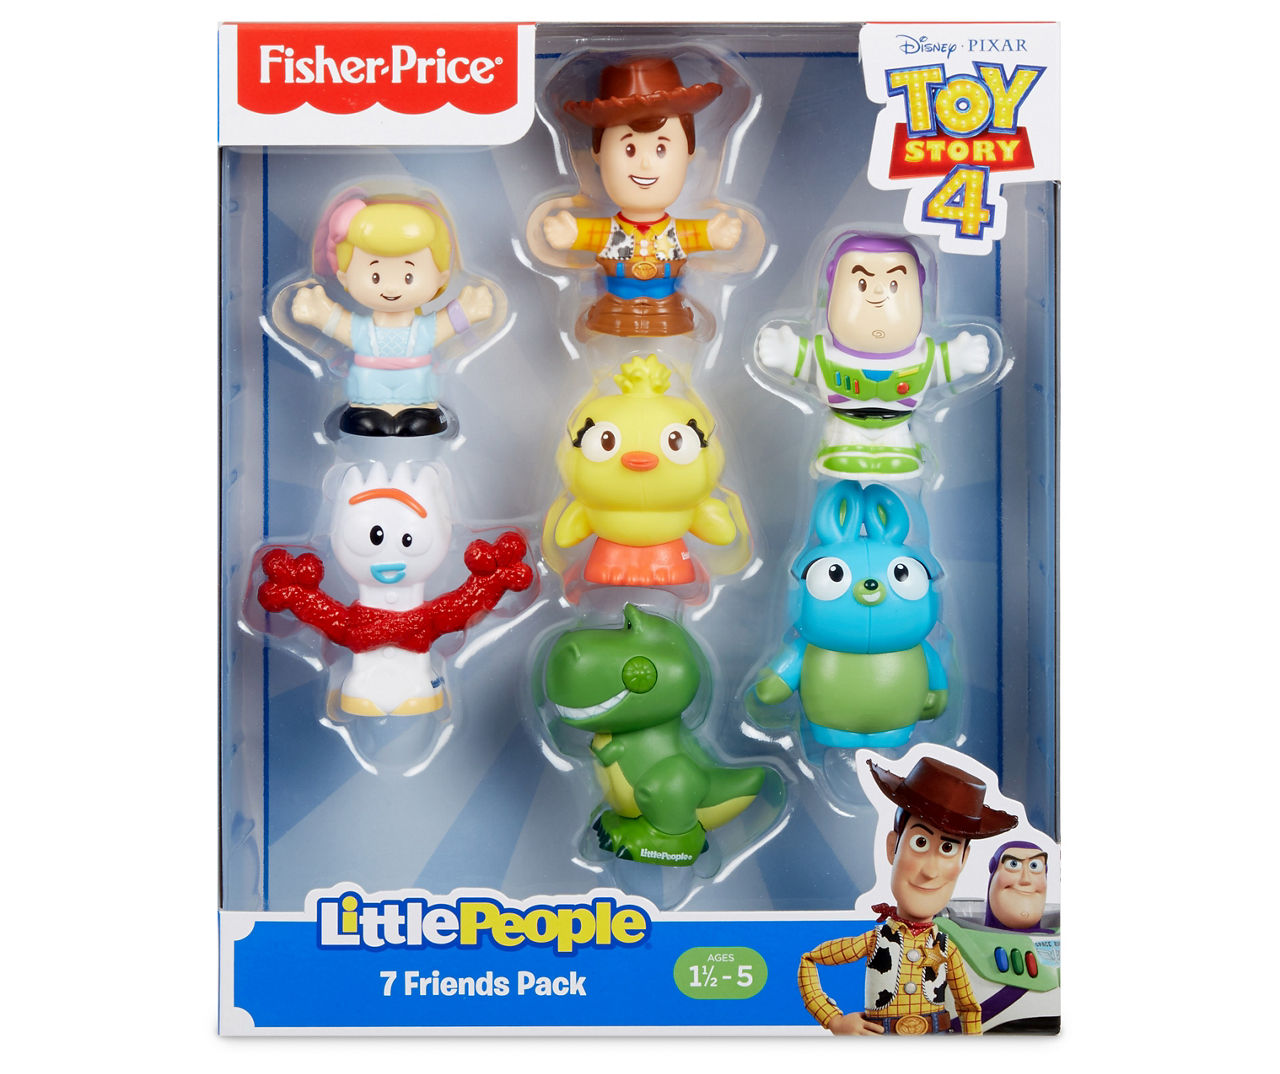 Fisher-Price Little People 7-Piece Toy Story 4 Friends Set